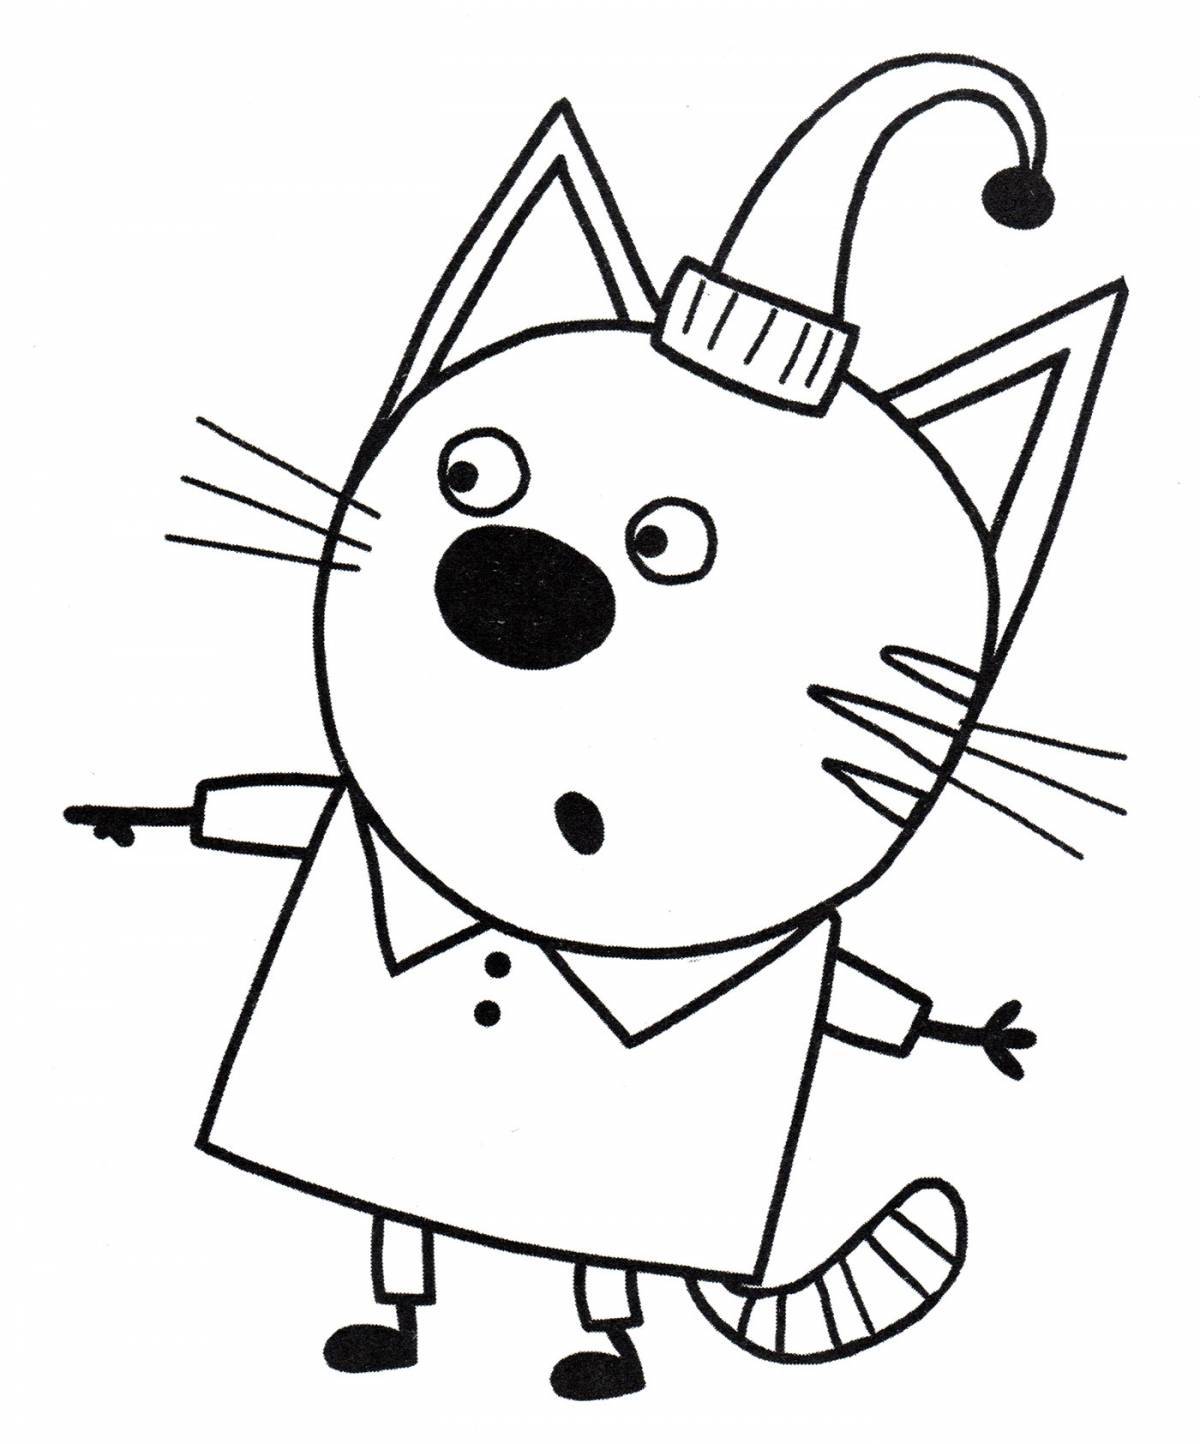 Three sparkling cats coloring book for preschoolers